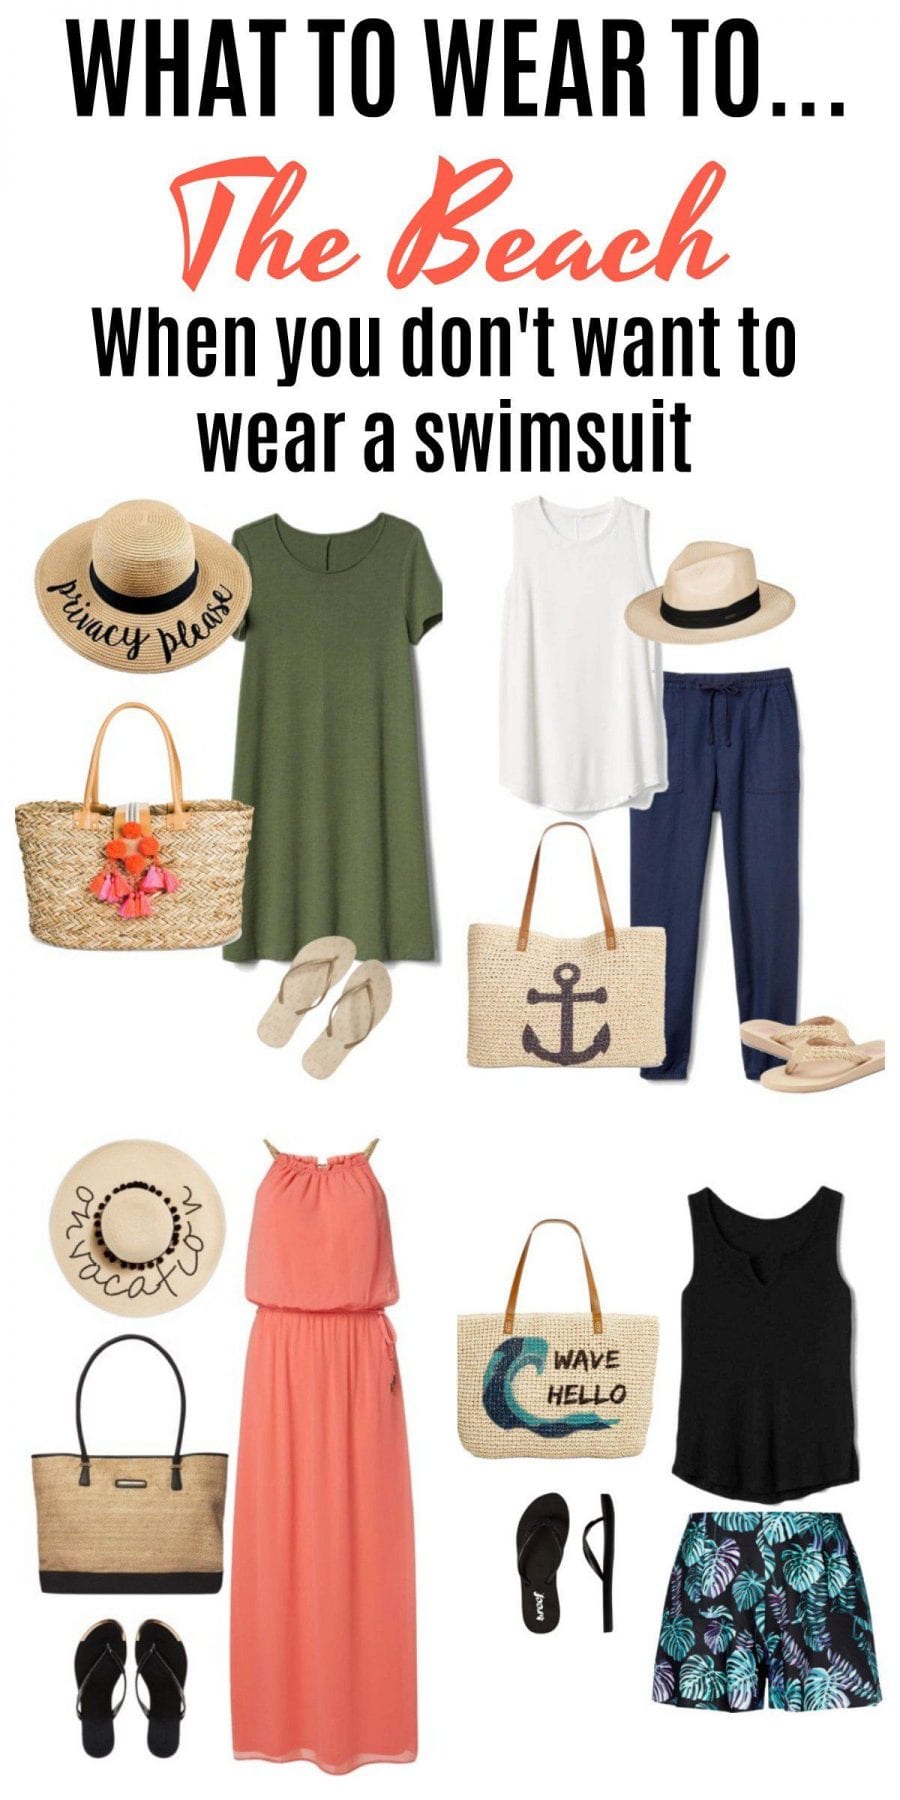 What To Wear To The Beach If You Don't Want To Wear or Have Swimsuit ...